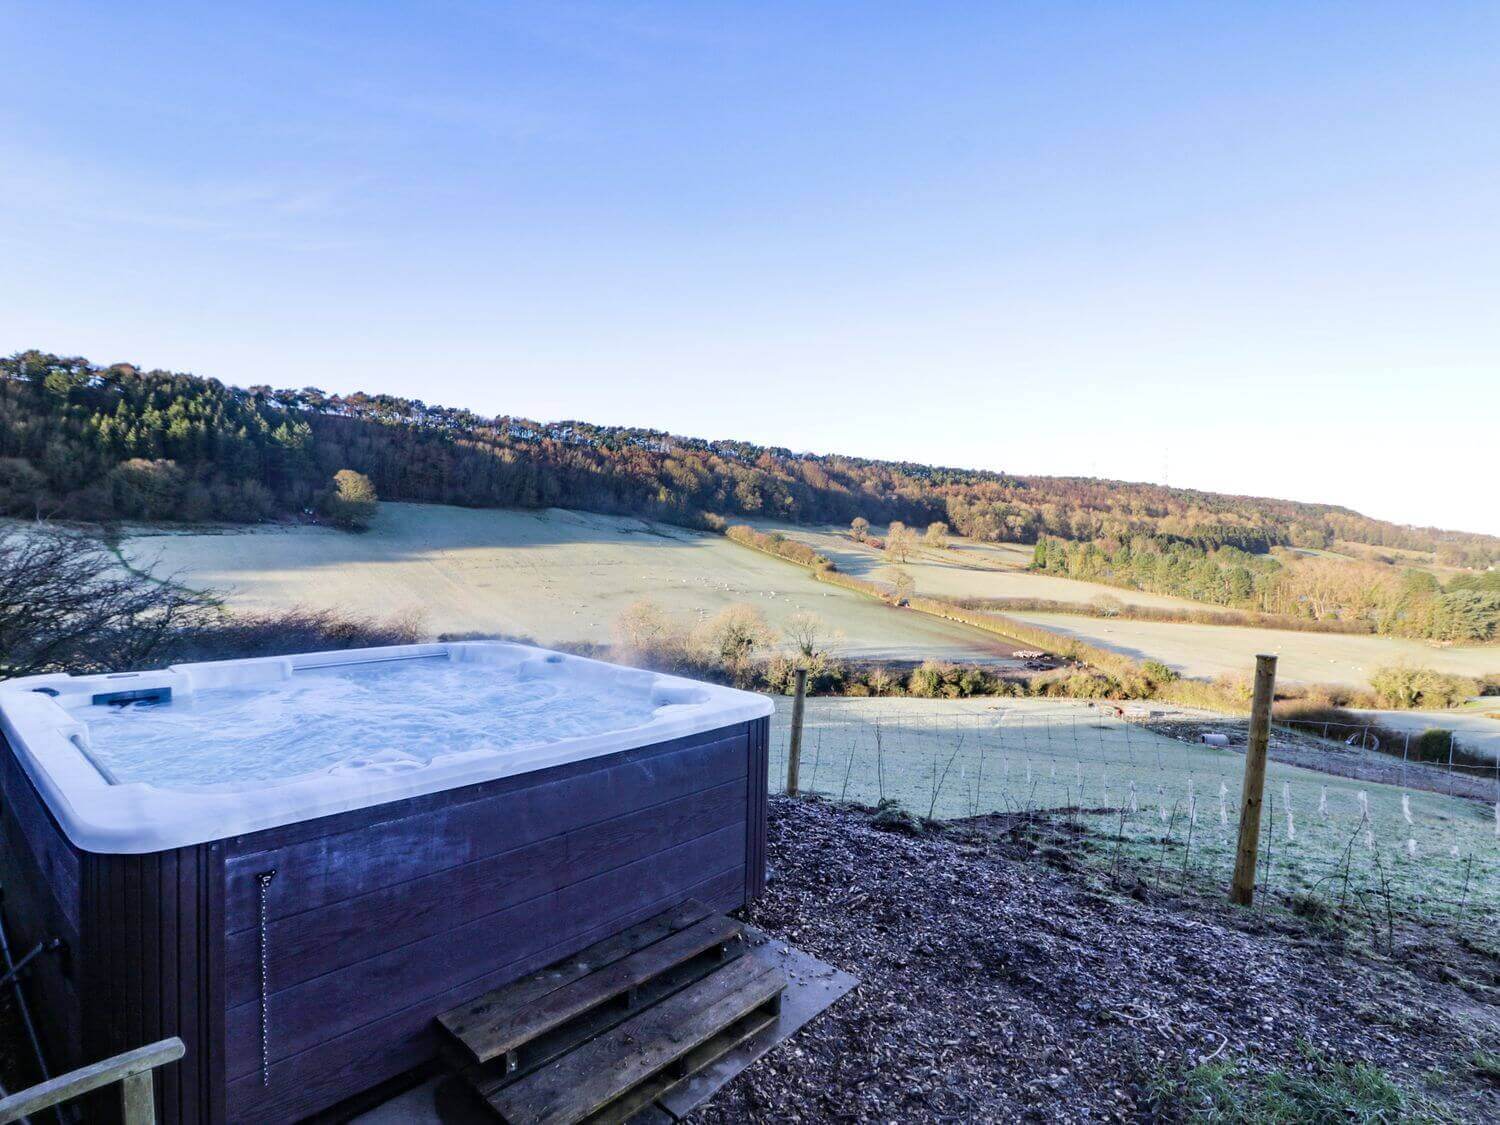 Hot tub in countryside ref 1050044